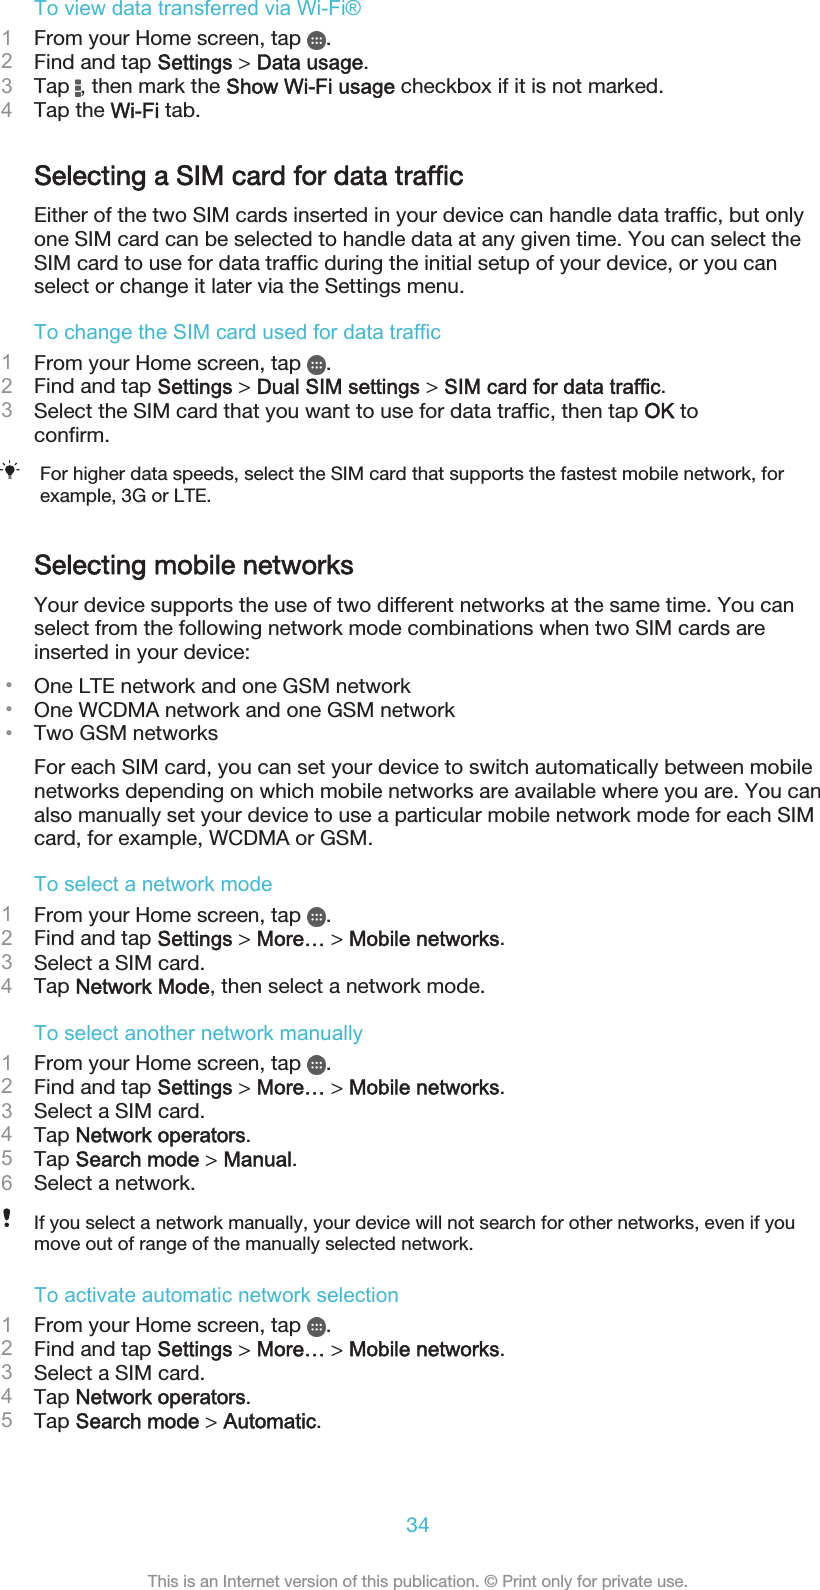 To view data transferred via Wi-Fi®1From your Home screen, tap  .2Find and tap Settings &gt; Data usage.3Tap  , then mark the Show Wi-Fi usage checkbox if it is not marked.4Tap the Wi-Fi tab.Selecting a SIM card for data trafficEither of the two SIM cards inserted in your device can handle data traffic, but onlyone SIM card can be selected to handle data at any given time. You can select theSIM card to use for data traffic during the initial setup of your device, or you canselect or change it later via the Settings menu.To change the SIM card used for data traffic1From your Home screen, tap  .2Find and tap Settings &gt; Dual SIM settings &gt; SIM card for data traffic.3Select the SIM card that you want to use for data traffic, then tap OK toconfirm.For higher data speeds, select the SIM card that supports the fastest mobile network, forexample, 3G or LTE.Selecting mobile networksYour device supports the use of two different networks at the same time. You canselect from the following network mode combinations when two SIM cards areinserted in your device:•One LTE network and one GSM network•One WCDMA network and one GSM network•Two GSM networksFor each SIM card, you can set your device to switch automatically between mobilenetworks depending on which mobile networks are available where you are. You canalso manually set your device to use a particular mobile network mode for each SIMcard, for example, WCDMA or GSM.To select a network mode1From your Home screen, tap  .2Find and tap Settings &gt; More… &gt; Mobile networks.3Select a SIM card.4Tap Network Mode, then select a network mode.To select another network manually1From your Home screen, tap  .2Find and tap Settings &gt; More… &gt; Mobile networks.3Select a SIM card.4Tap Network operators.5Tap Search mode &gt; Manual.6Select a network.If you select a network manually, your device will not search for other networks, even if youmove out of range of the manually selected network.To activate automatic network selection1From your Home screen, tap  .2Find and tap Settings &gt; More… &gt; Mobile networks.3Select a SIM card.4Tap Network operators.5Tap Search mode &gt; Automatic.34This is an Internet version of this publication. © Print only for private use.